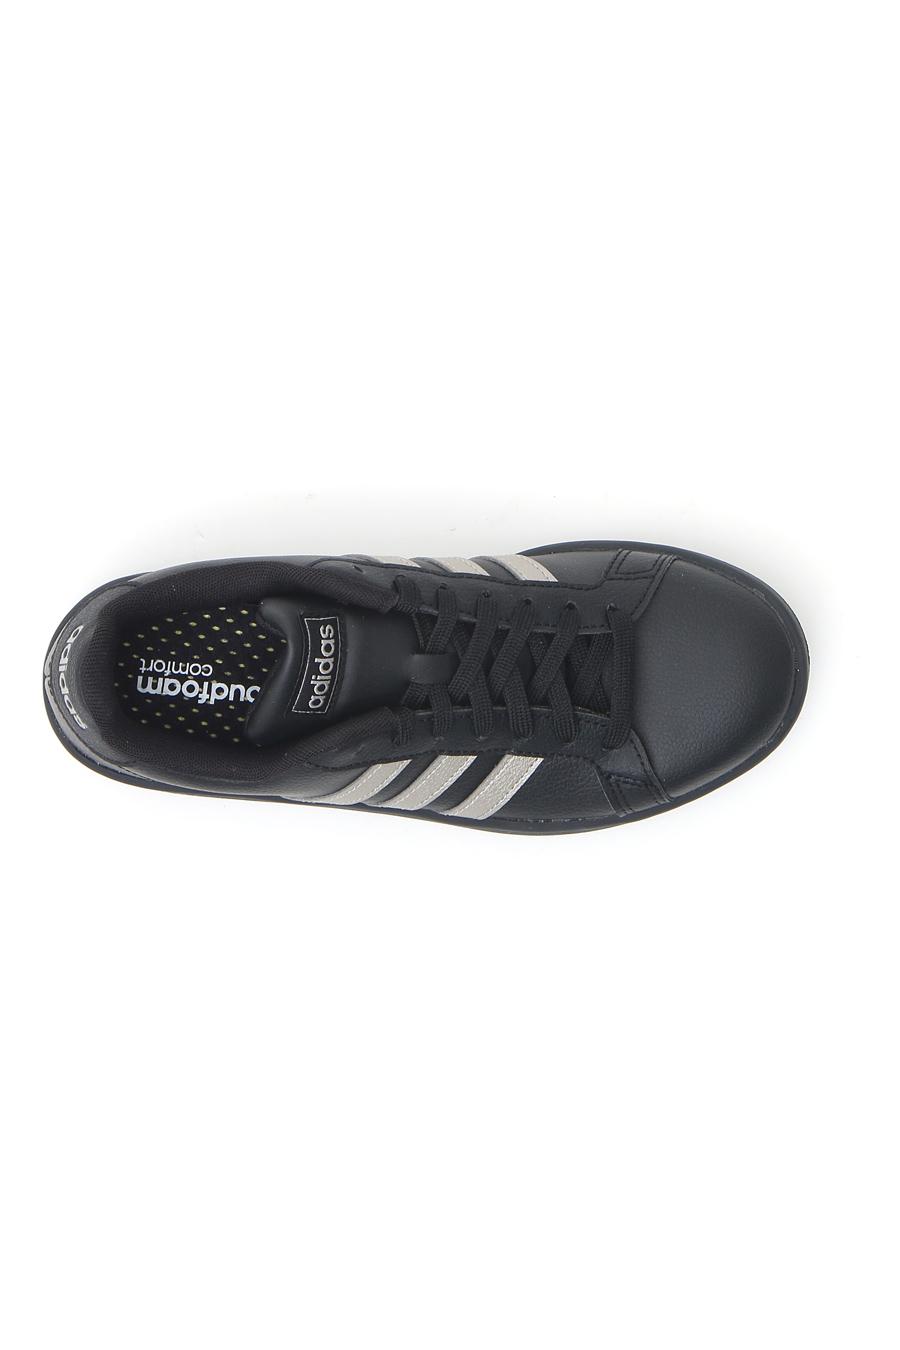 Sneakers adidas Grand Court Nere Strisce Piombo